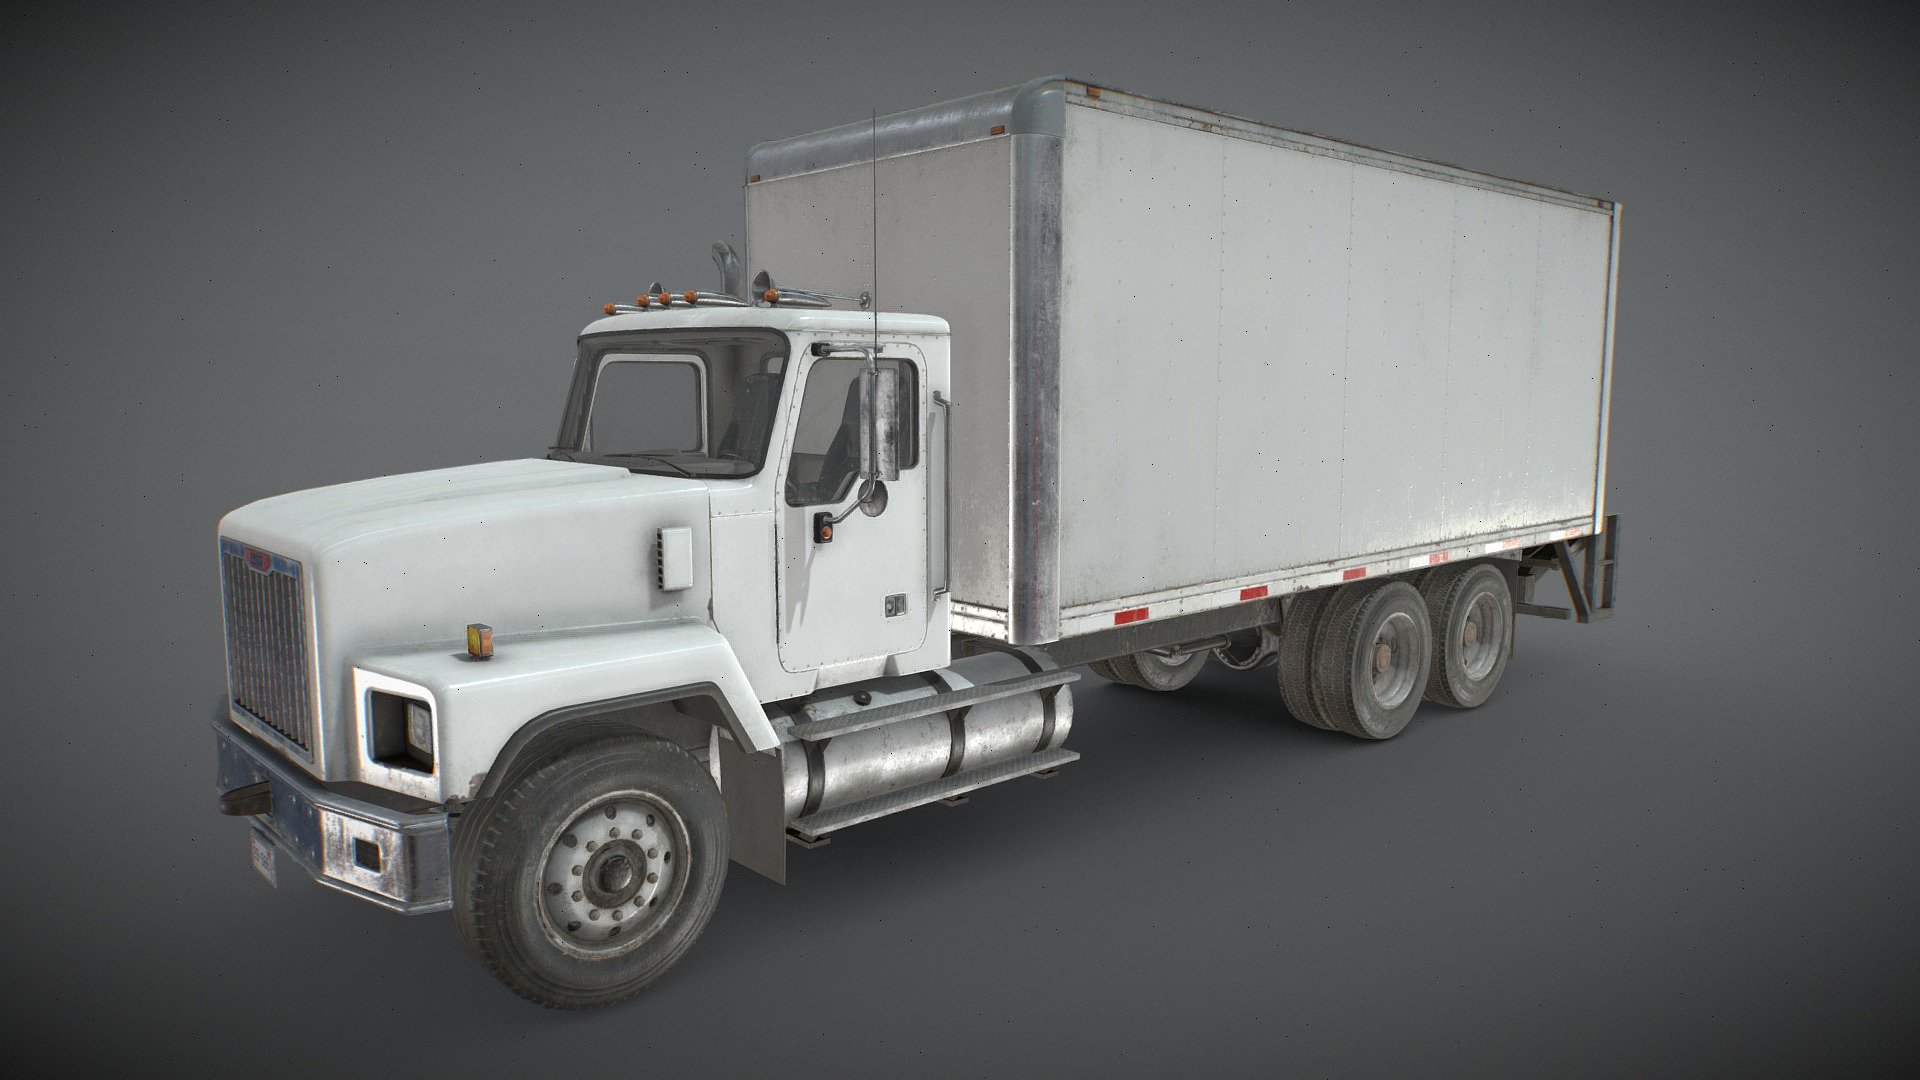 Low Poly 3D model of a generic Classic Cargo Truck:




Real-world scale and centered.

The unit of measurement used for the model is centimeters

Doors, wheels and steering wheel are separated and can be easily removed or rigged/animated (model not animated).

Interior is a separate object to detach if needed.

PBR textures made in Substance Painter

All branding and labels are custom made.

Unbranded box, decals can be added.

Model also compatible with other &ldquo;Classic Truck